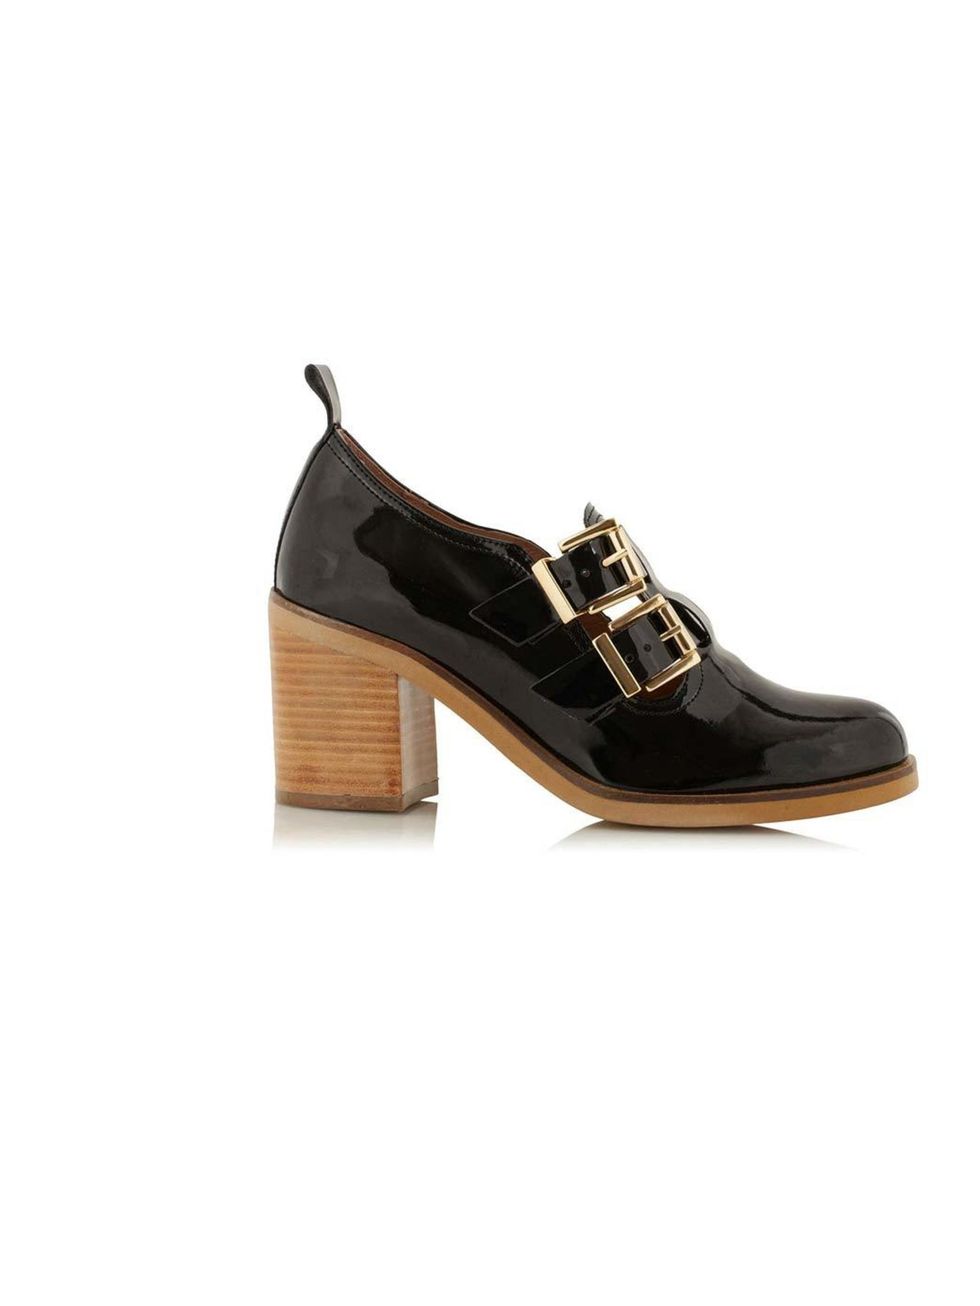 <p>These patent leather buckle-up shoes strike just the right balance between preppy and clunky <a href="http://www.topshop.com/webapp/wcs/stores/servlet/ProductDisplay?beginIndex=1&viewAllFlag=&catalogId=33057&storeId=12556&productId=9791937&langId=-1&s